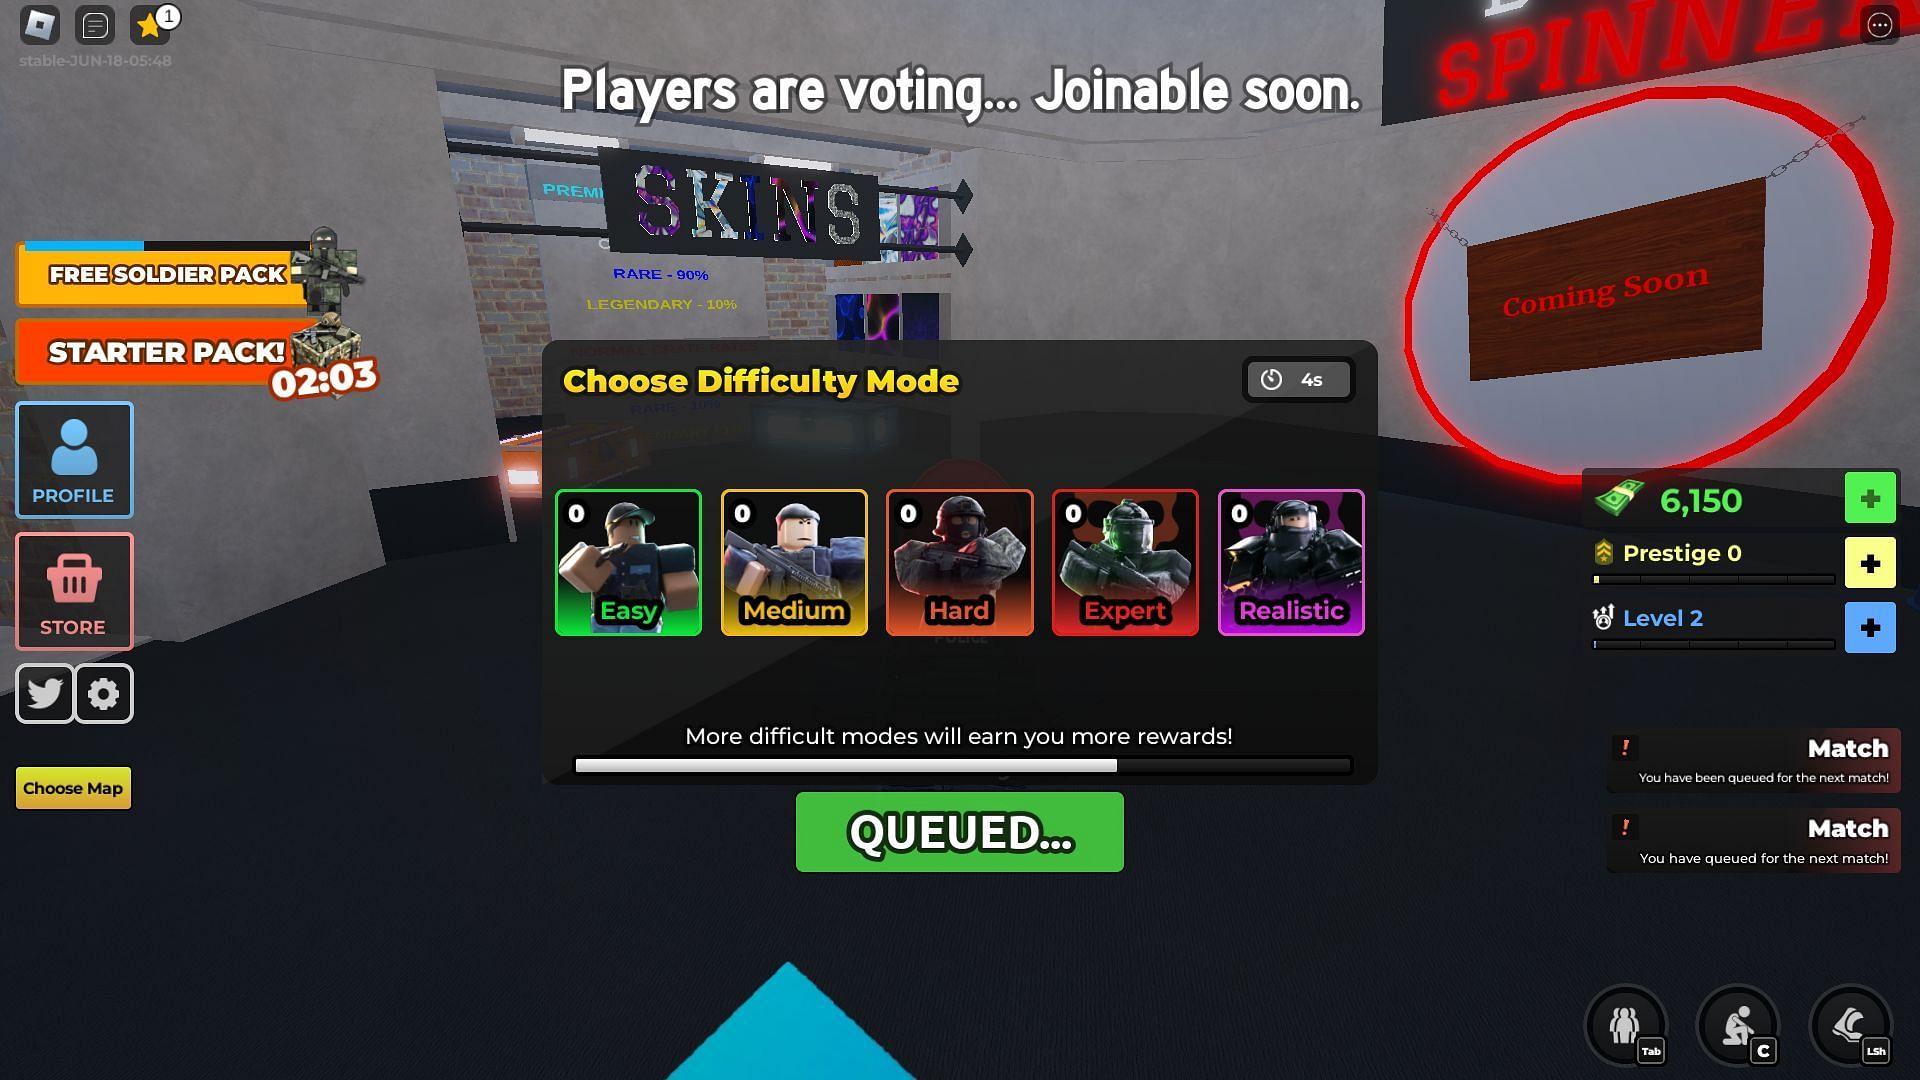 Available difficulty options (Image via Roblox)